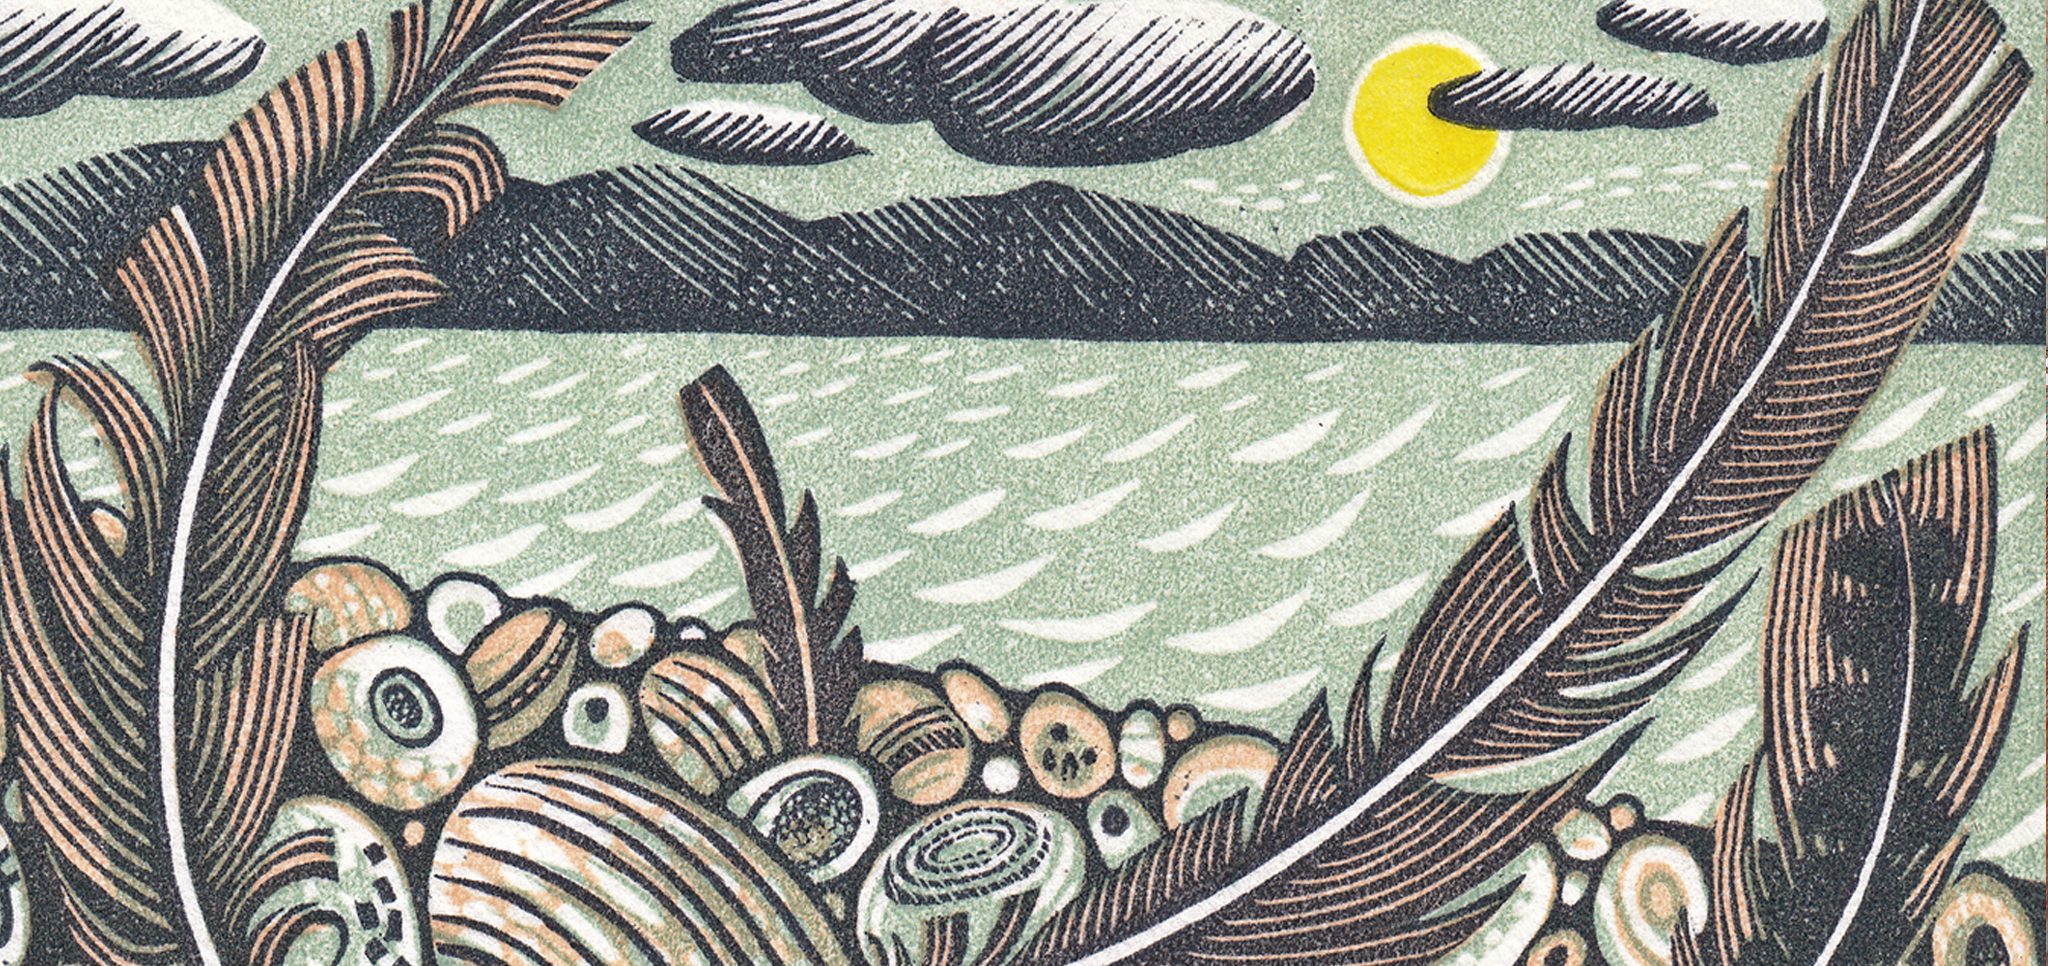 Angie Lewin. Tideline Feathers (detail)